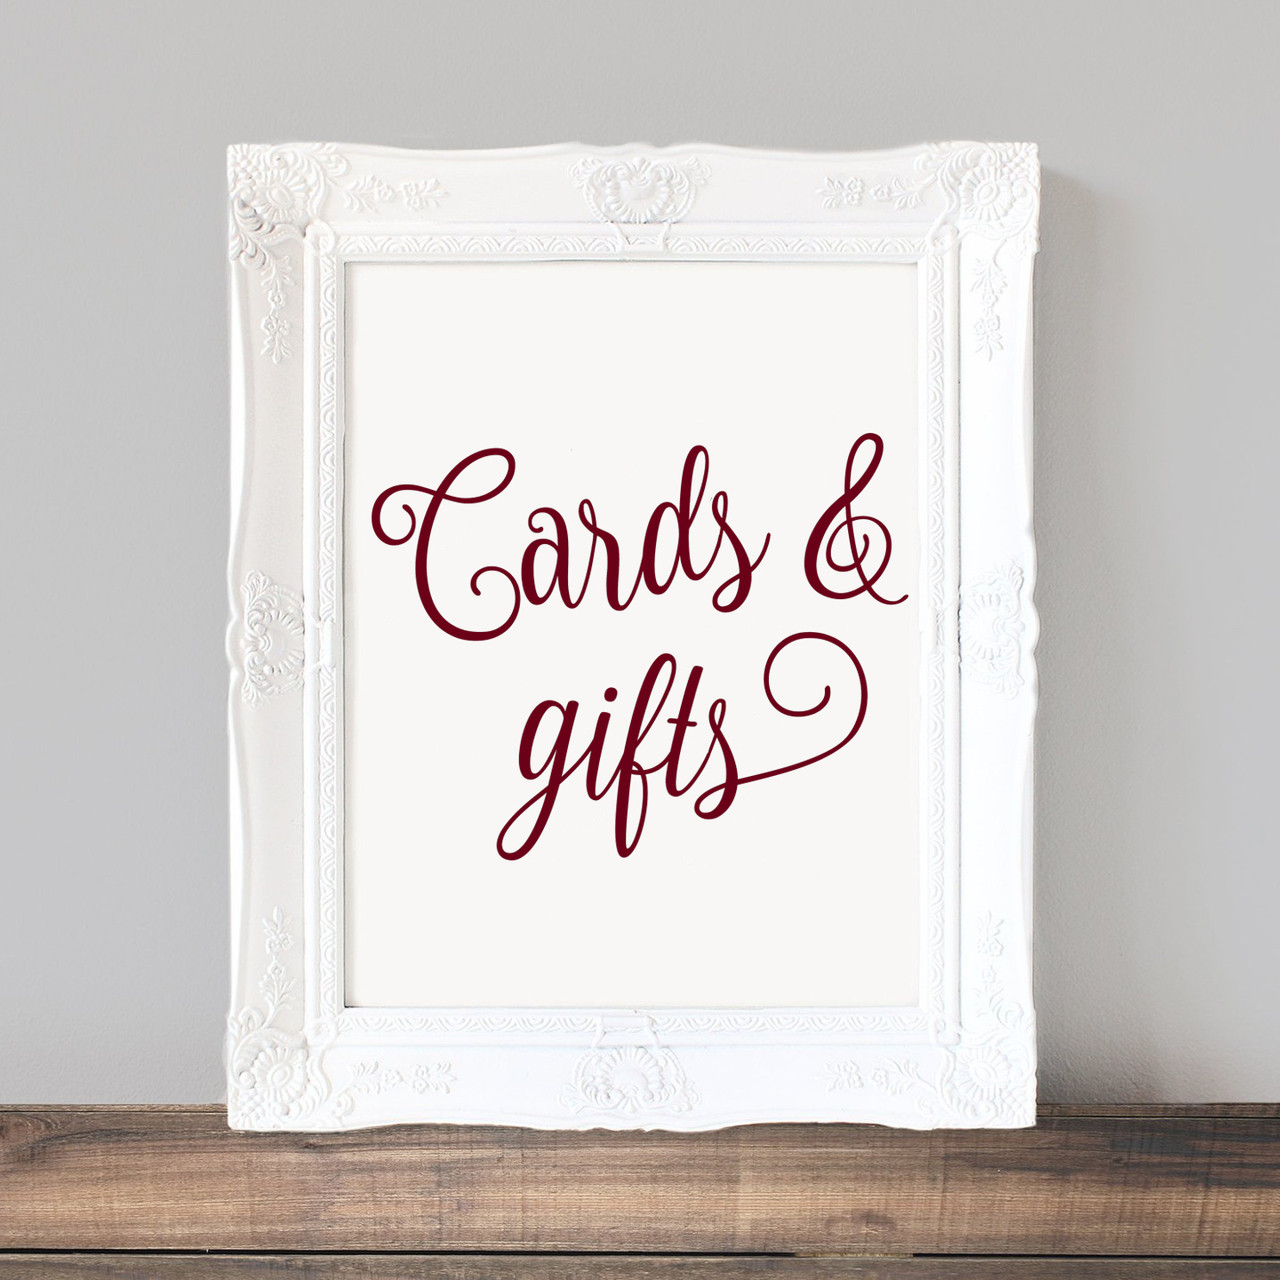 CARDS & GIFTS 8" x 6.5" Vinyl Decal Sticker - Wedding Label Sign